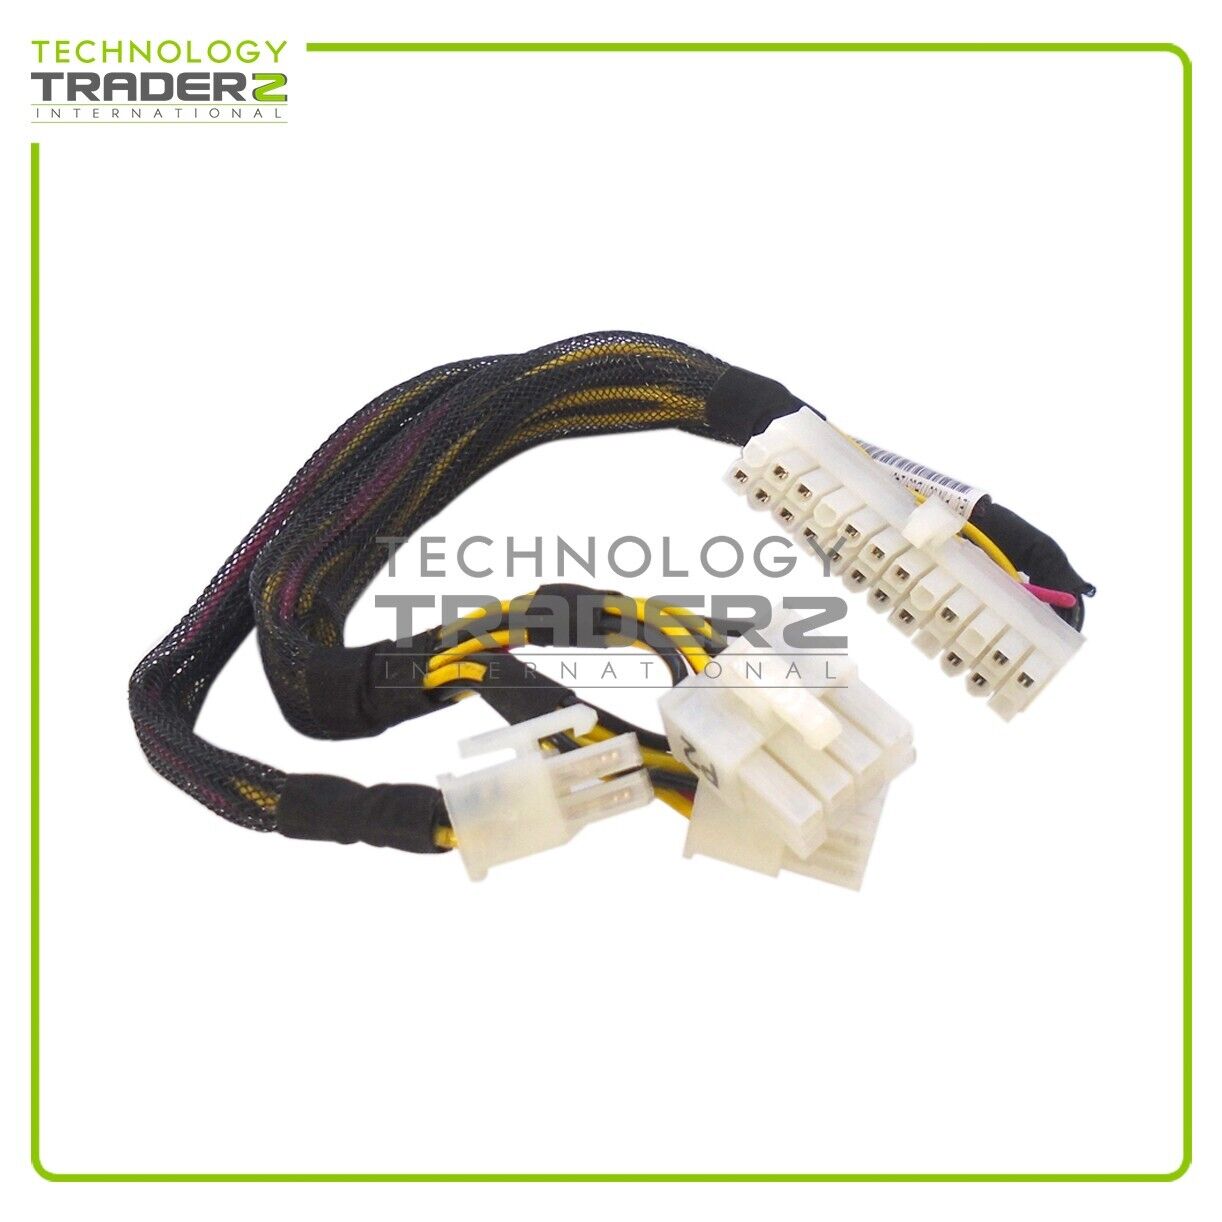 668325-001 HP ProLiant DL380E G8 HDD Backplane Power Cable 670703-001 687955-001